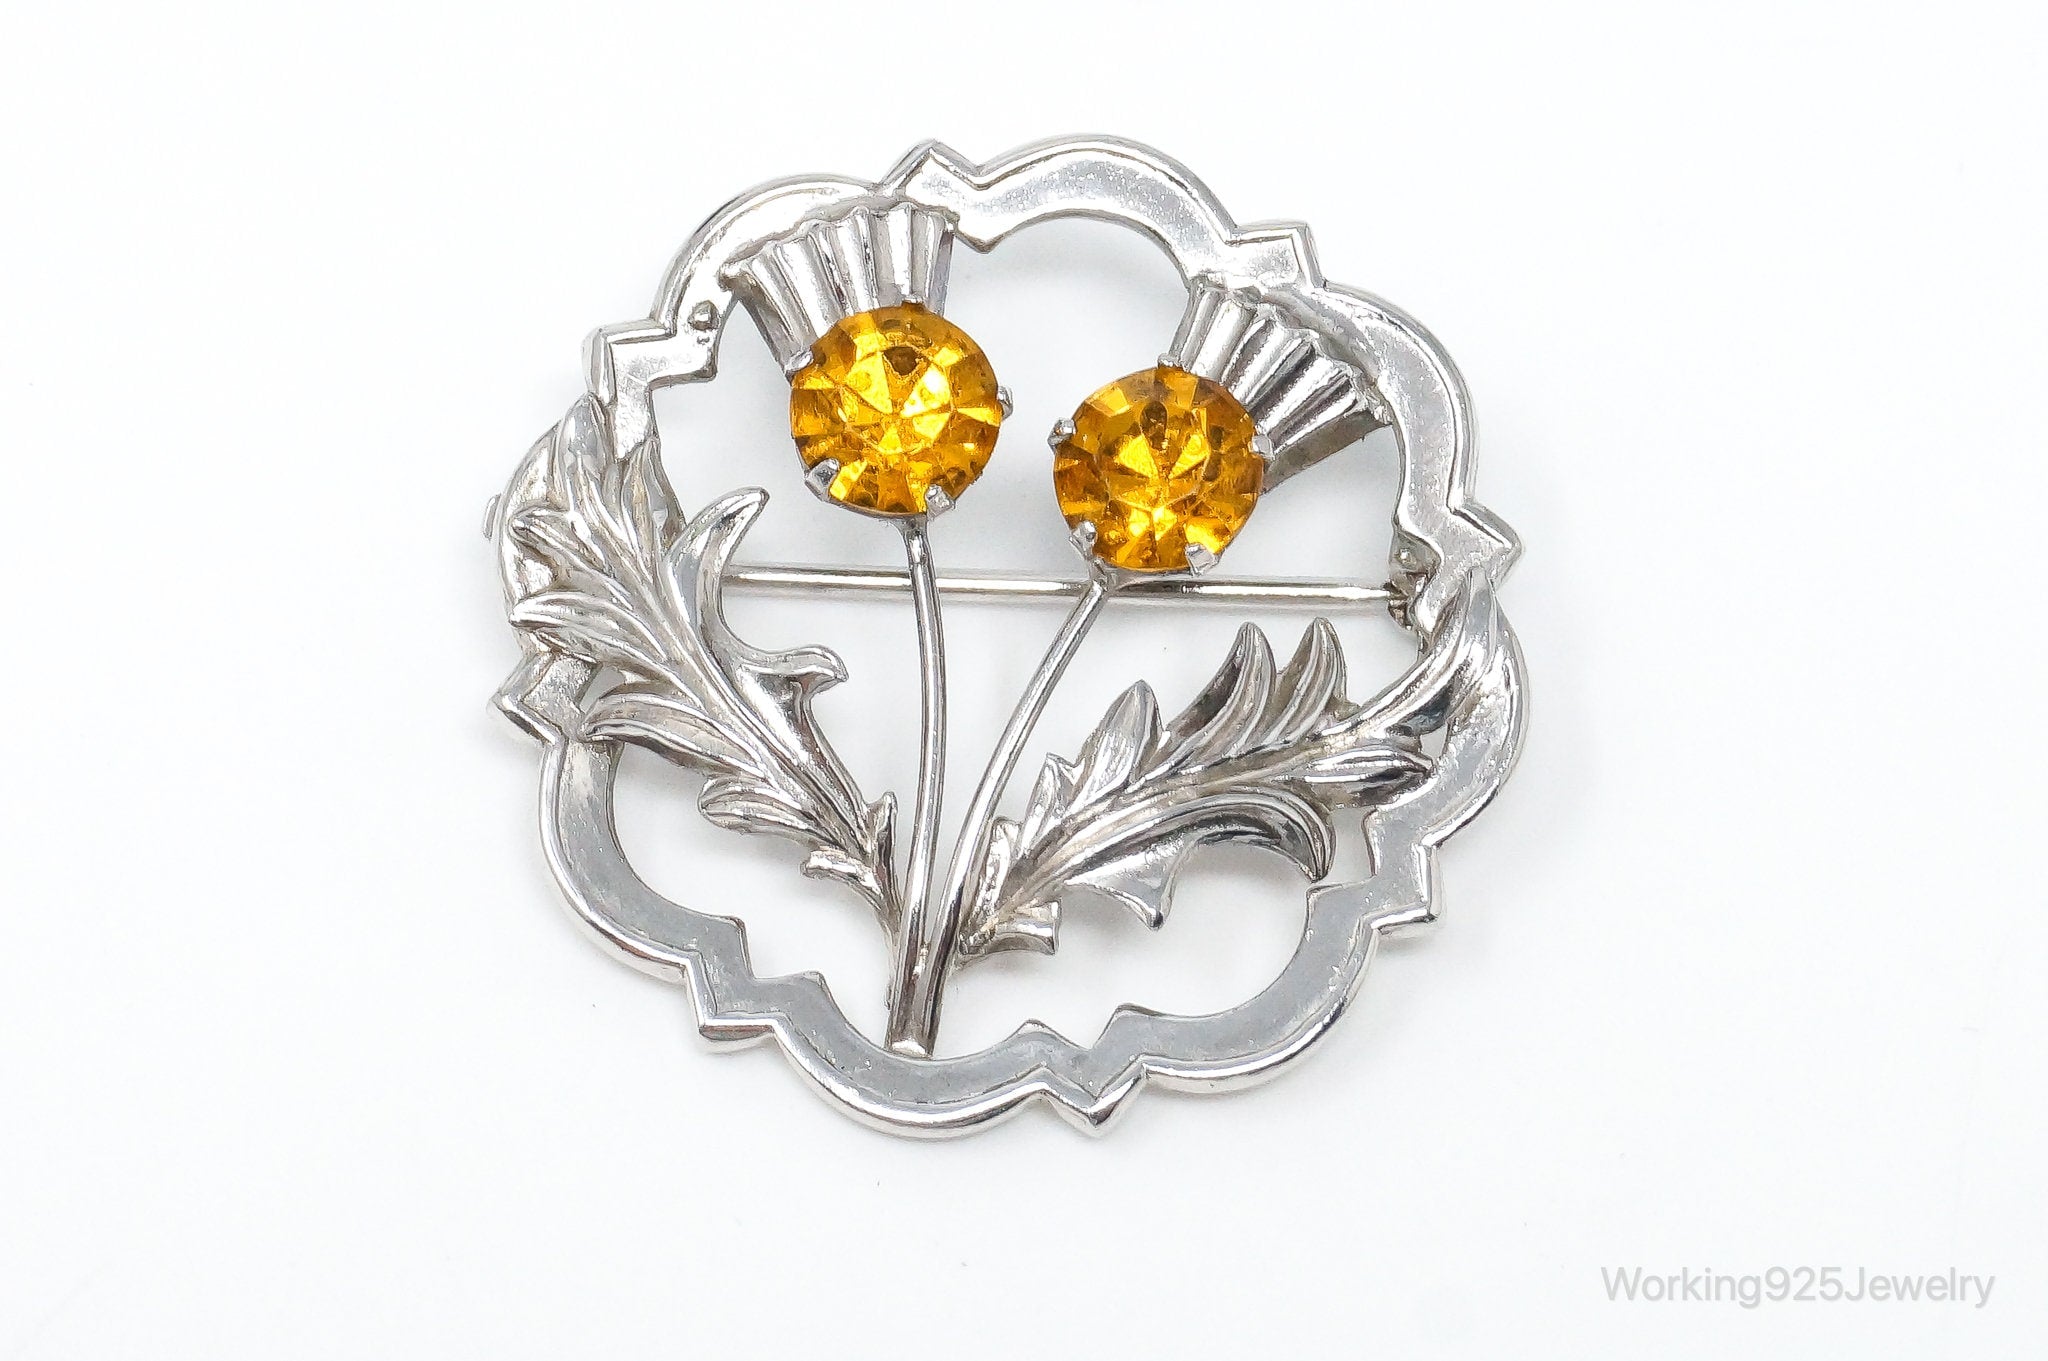 Vintage WB Ward Brothers Citrine Scottish Thistle Sterling Silver Brooch